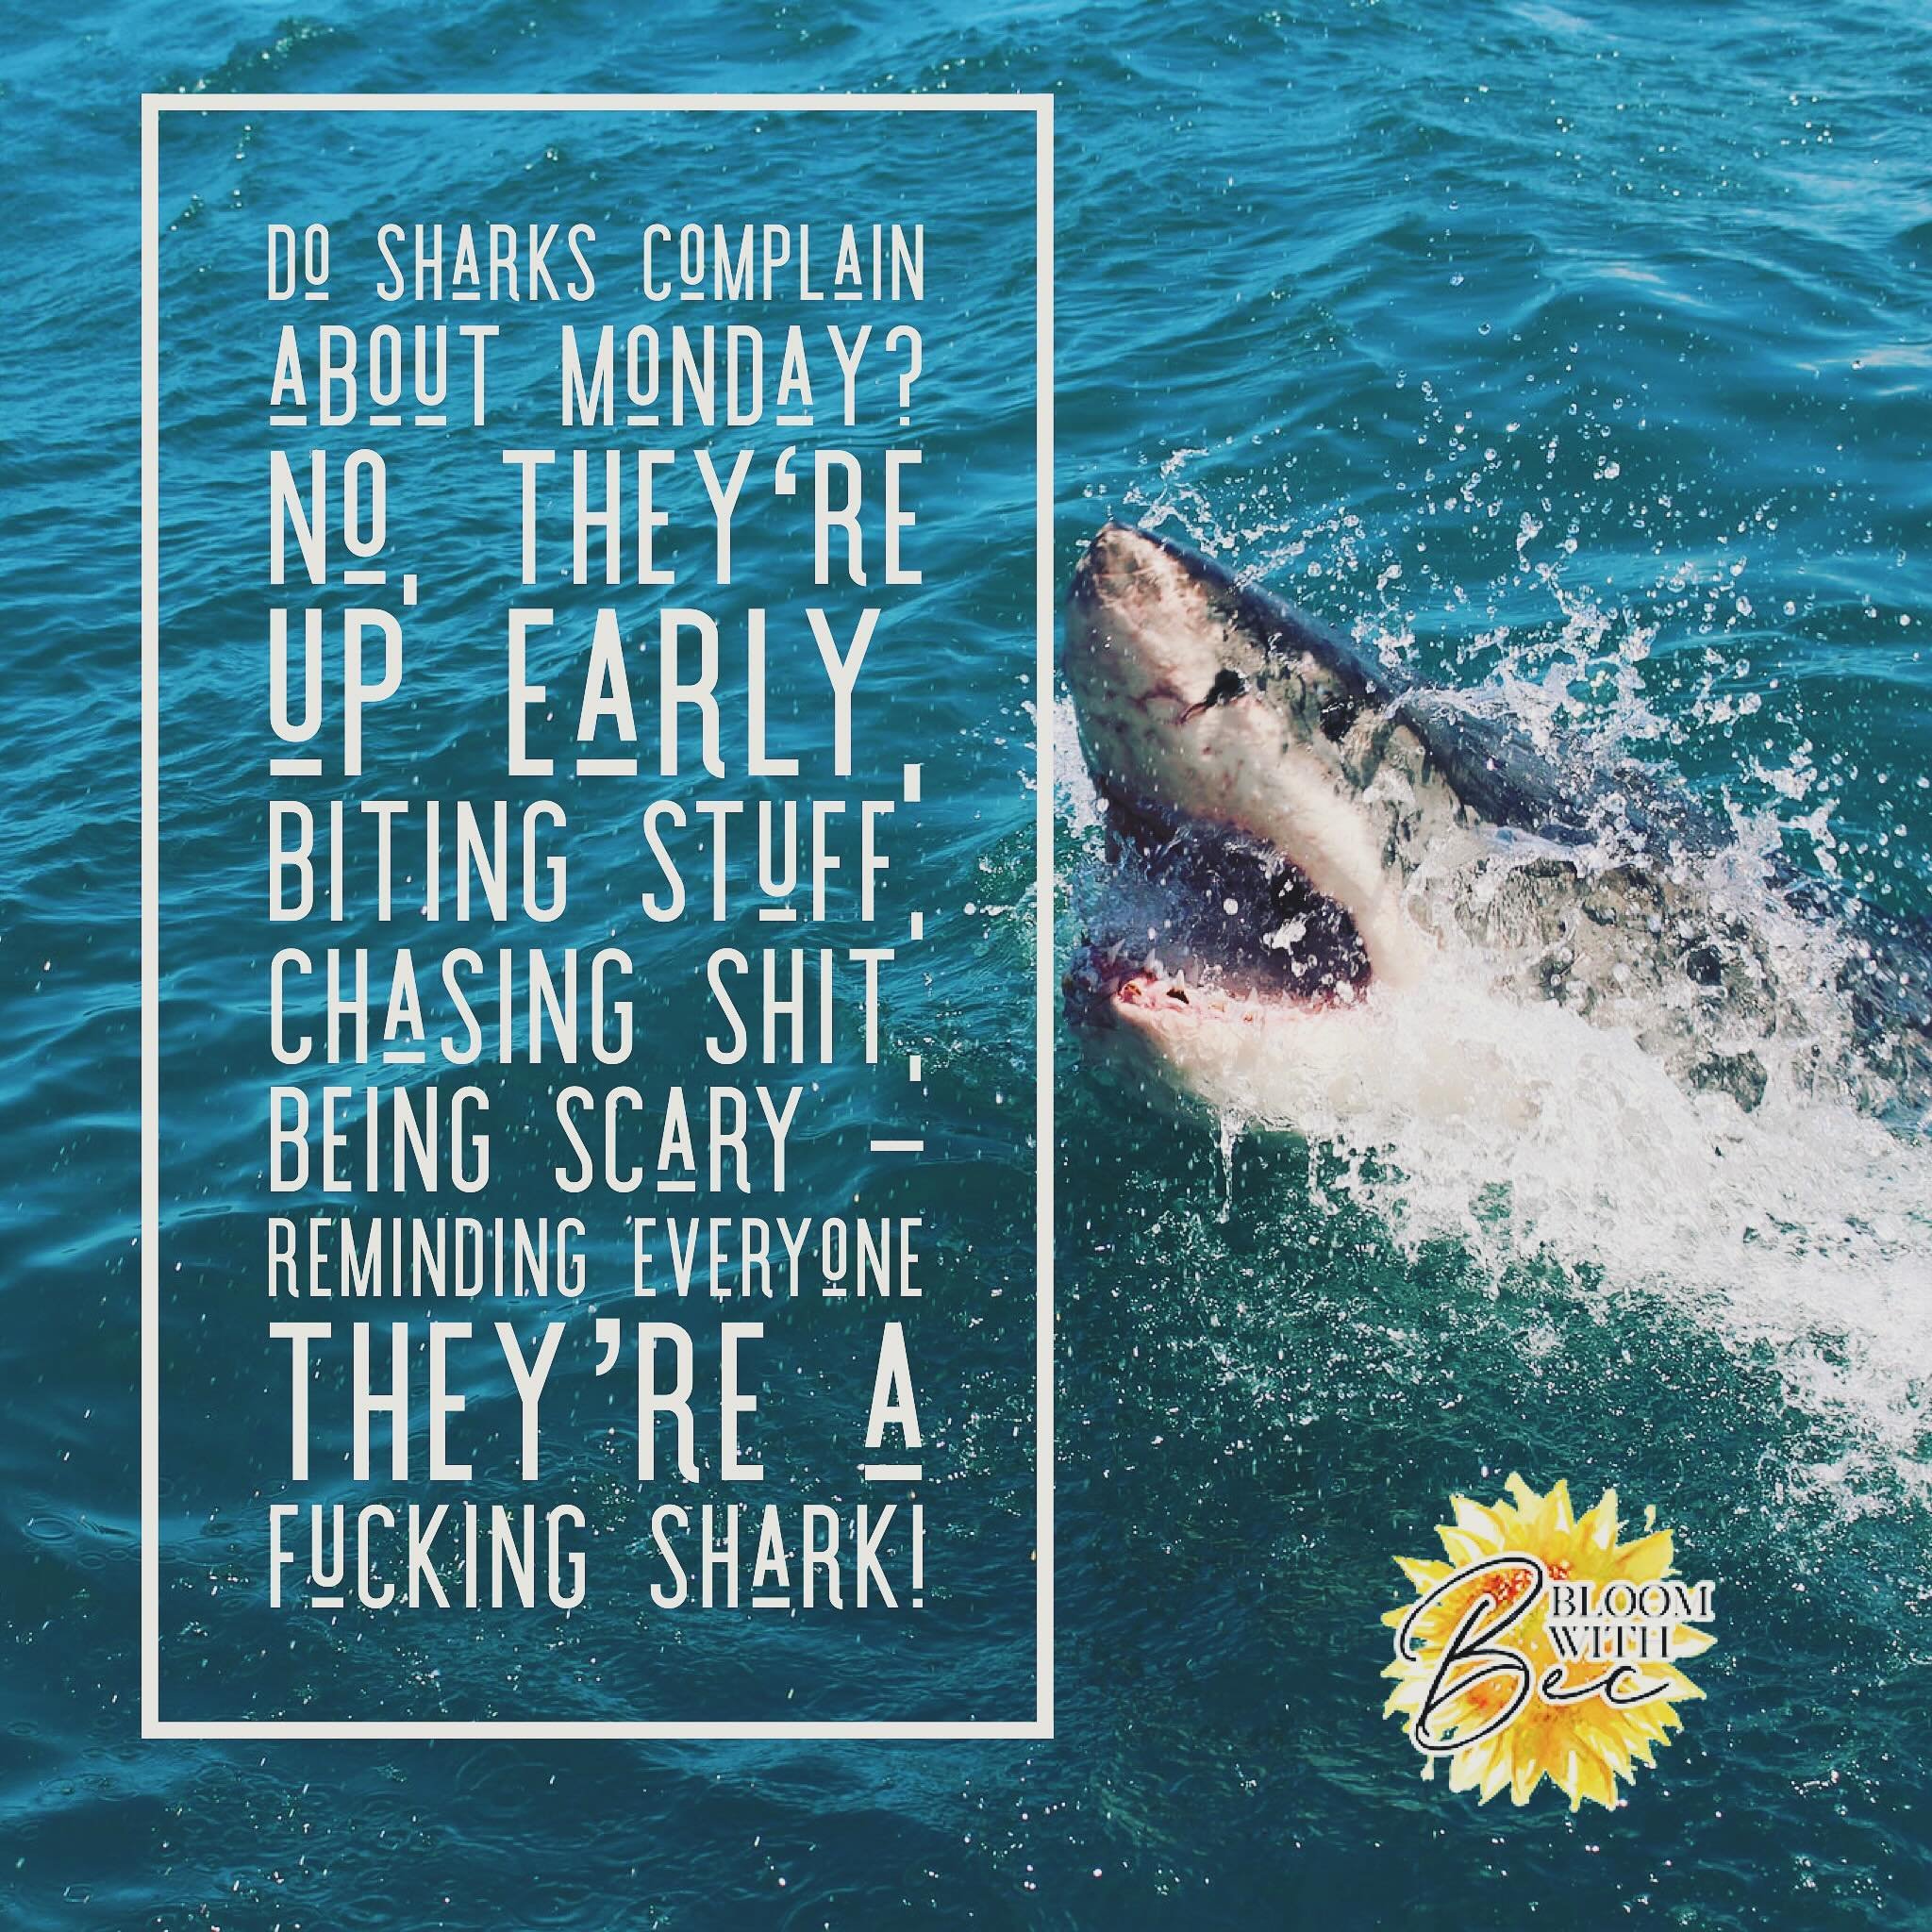 It&rsquo;s Monday! 🦈

Haven&rsquo;t pulled out THE BEST #mondaymotivation post in awhile. 😂

#lifecoachingtips #sharks #mondayvibes #bloomwithbeccoaching